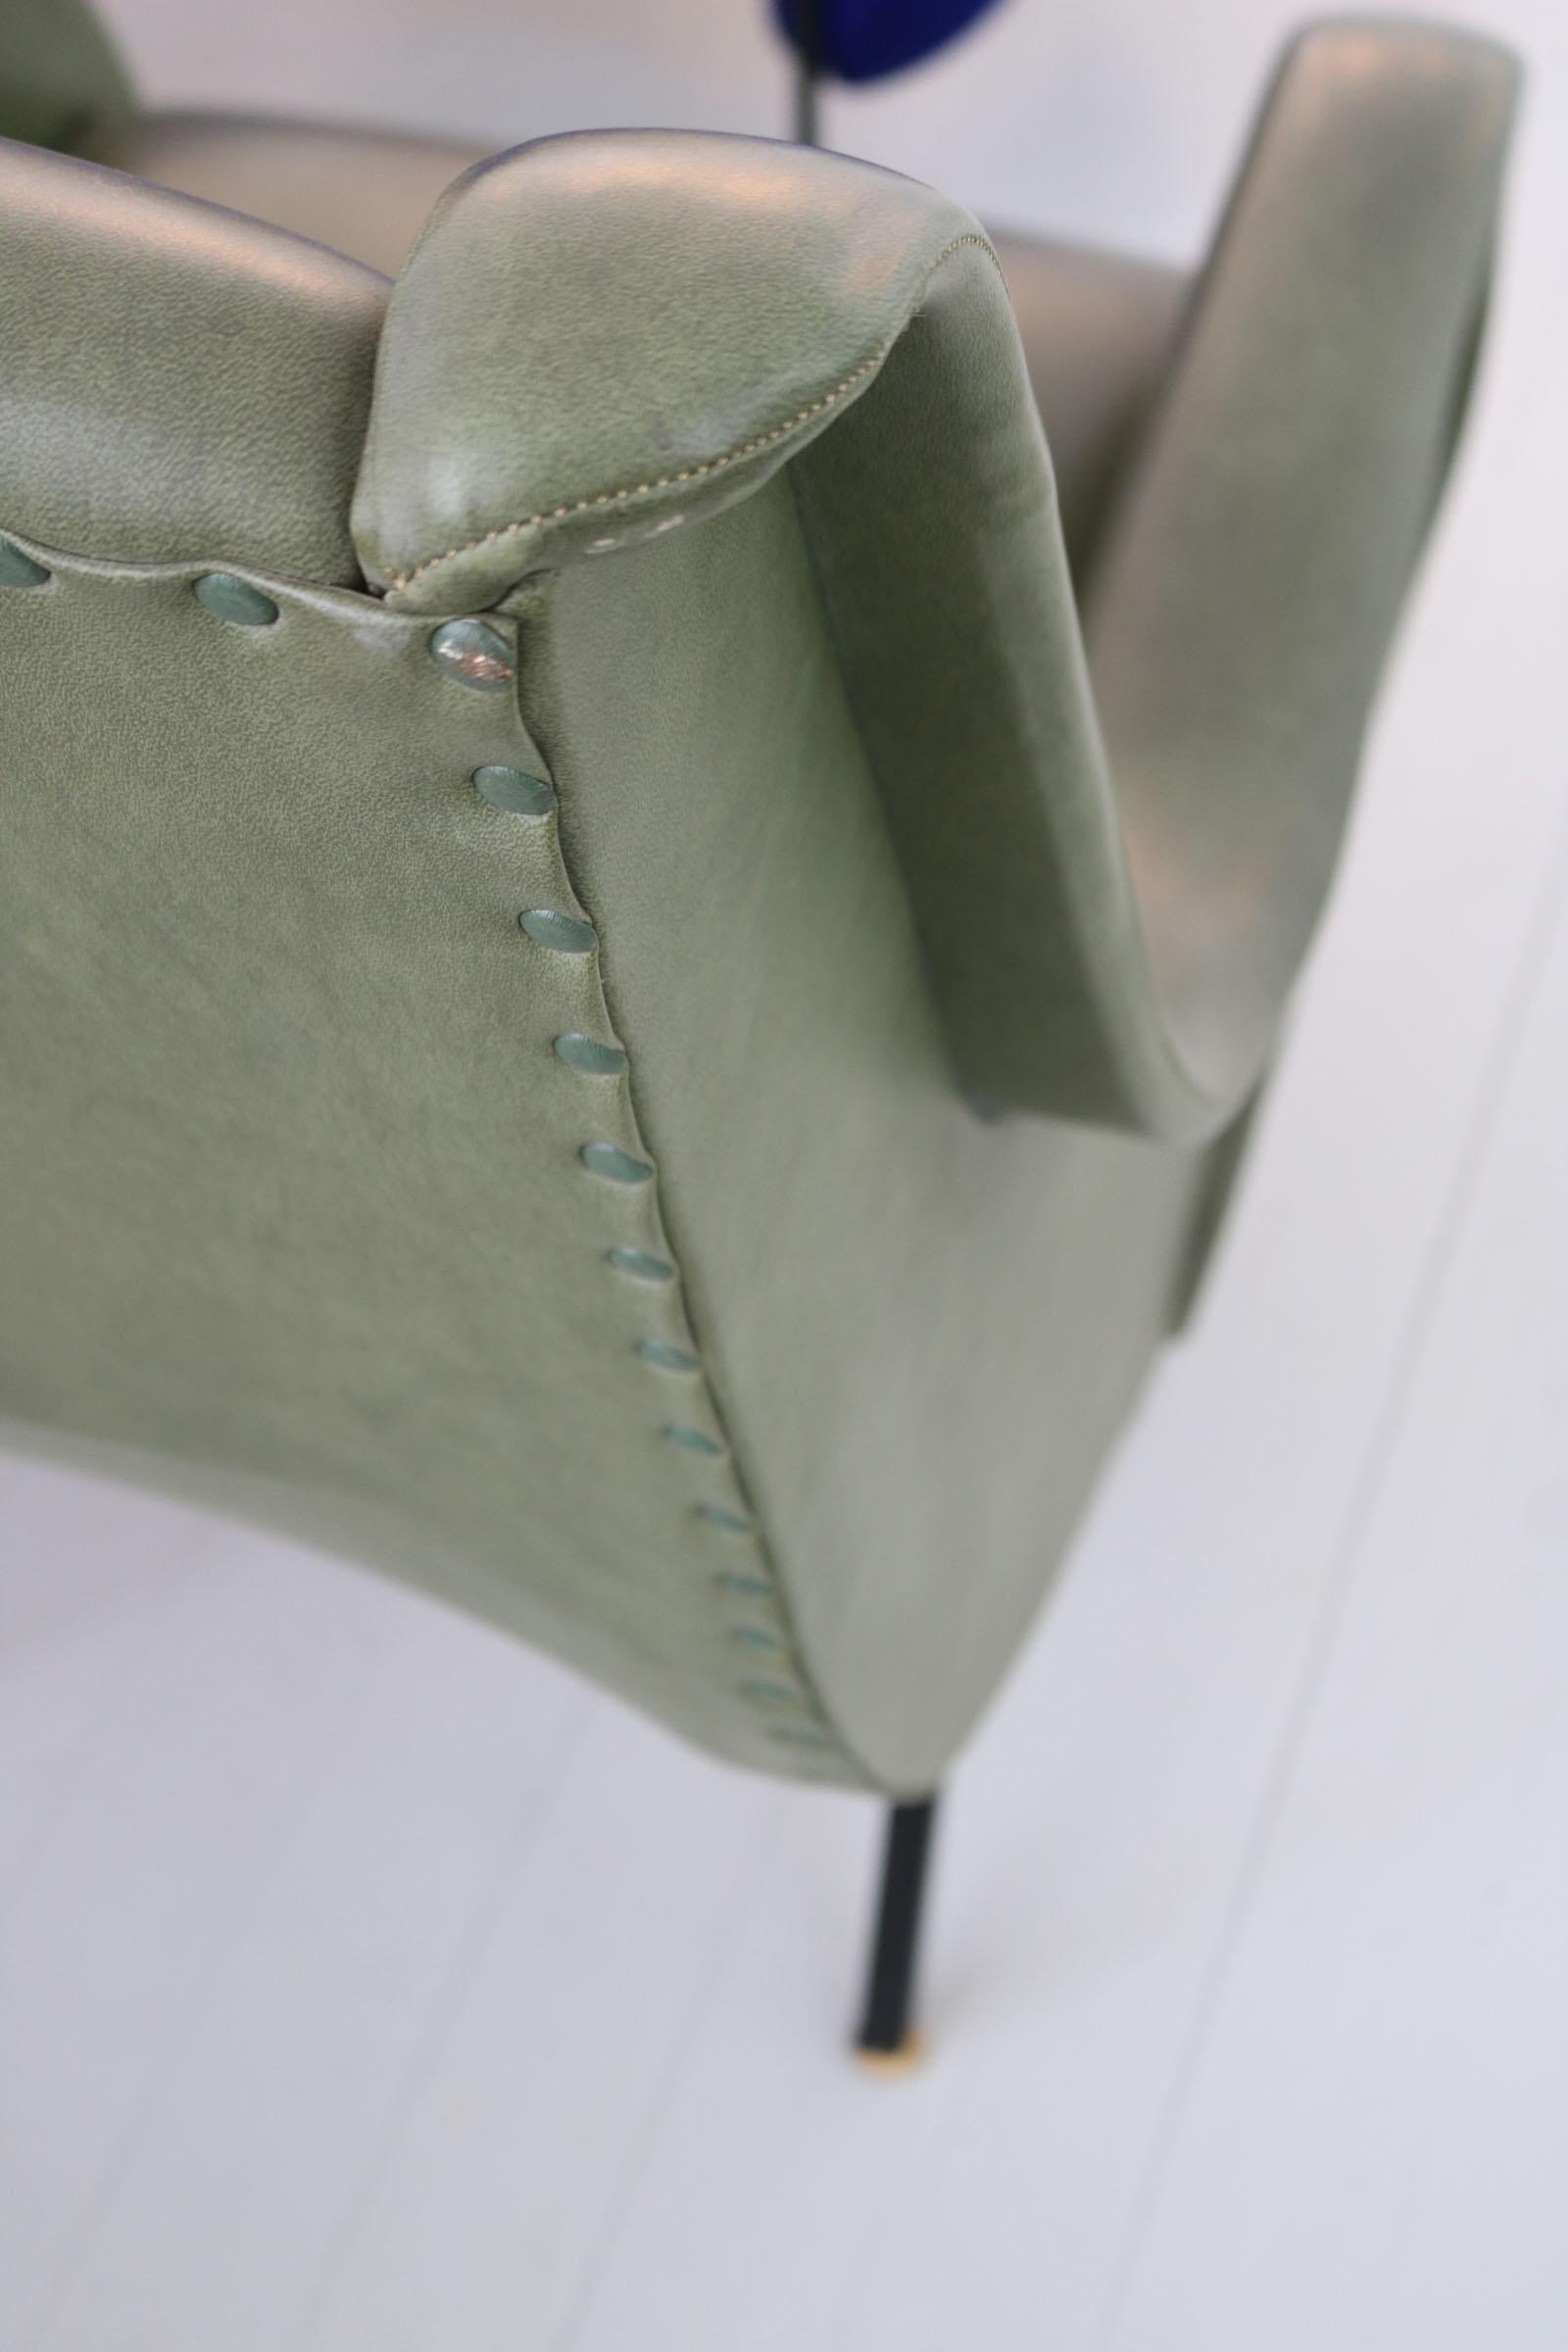 Pair of Italian Midcentury Armchairs in Original Green Fauxleather, 1950s For Sale 2